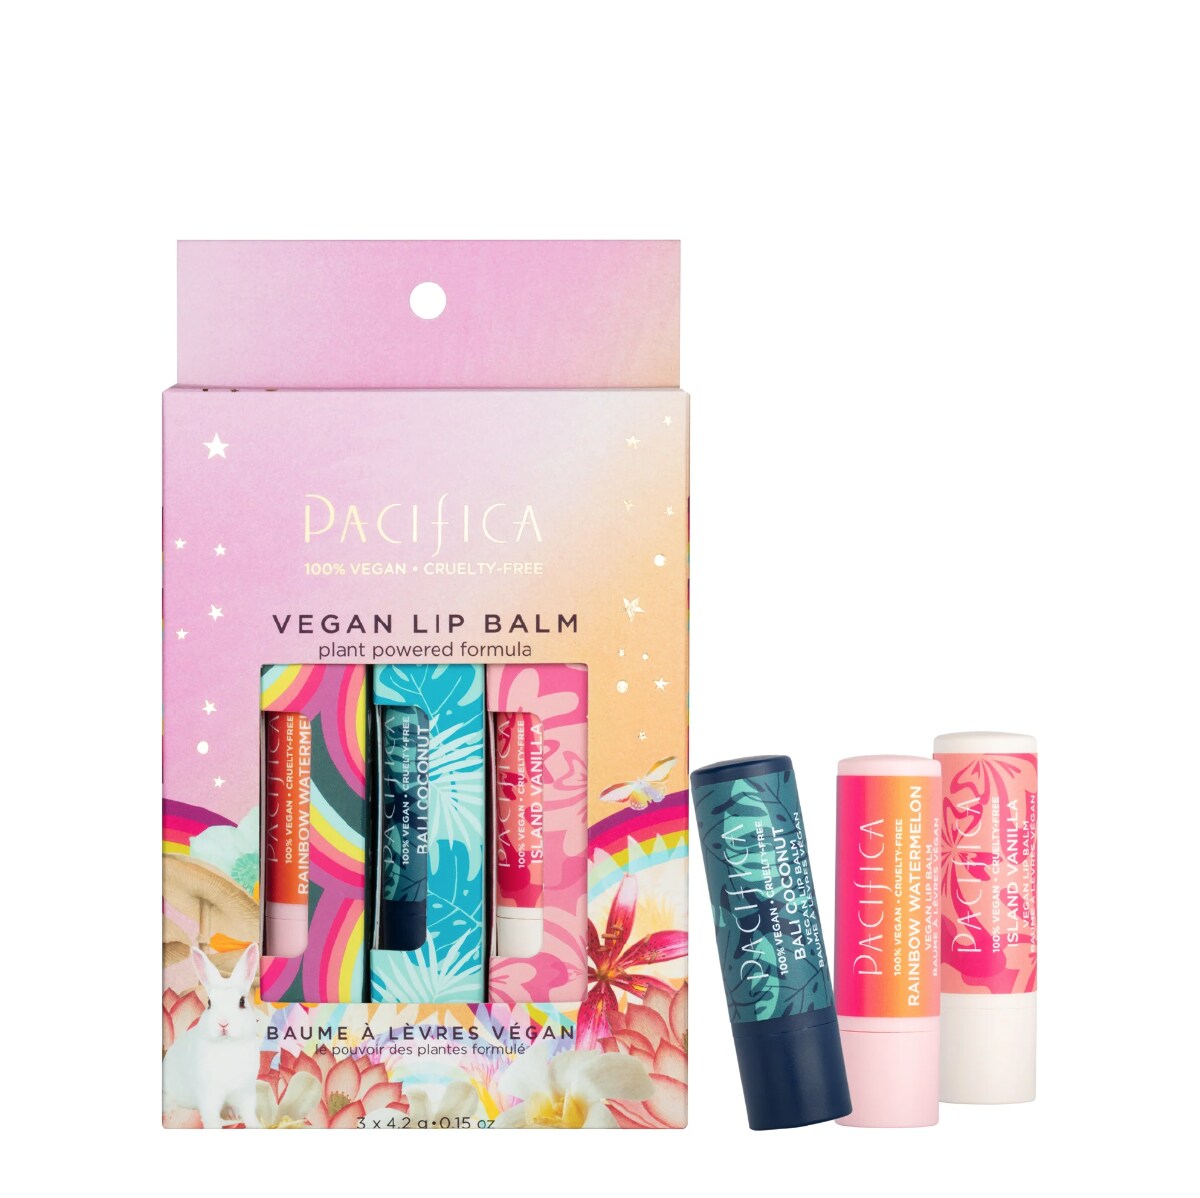 A pink rainbow box of Pacifica Vegan Lip Balm next to three tubes of lip balm against a white background. 